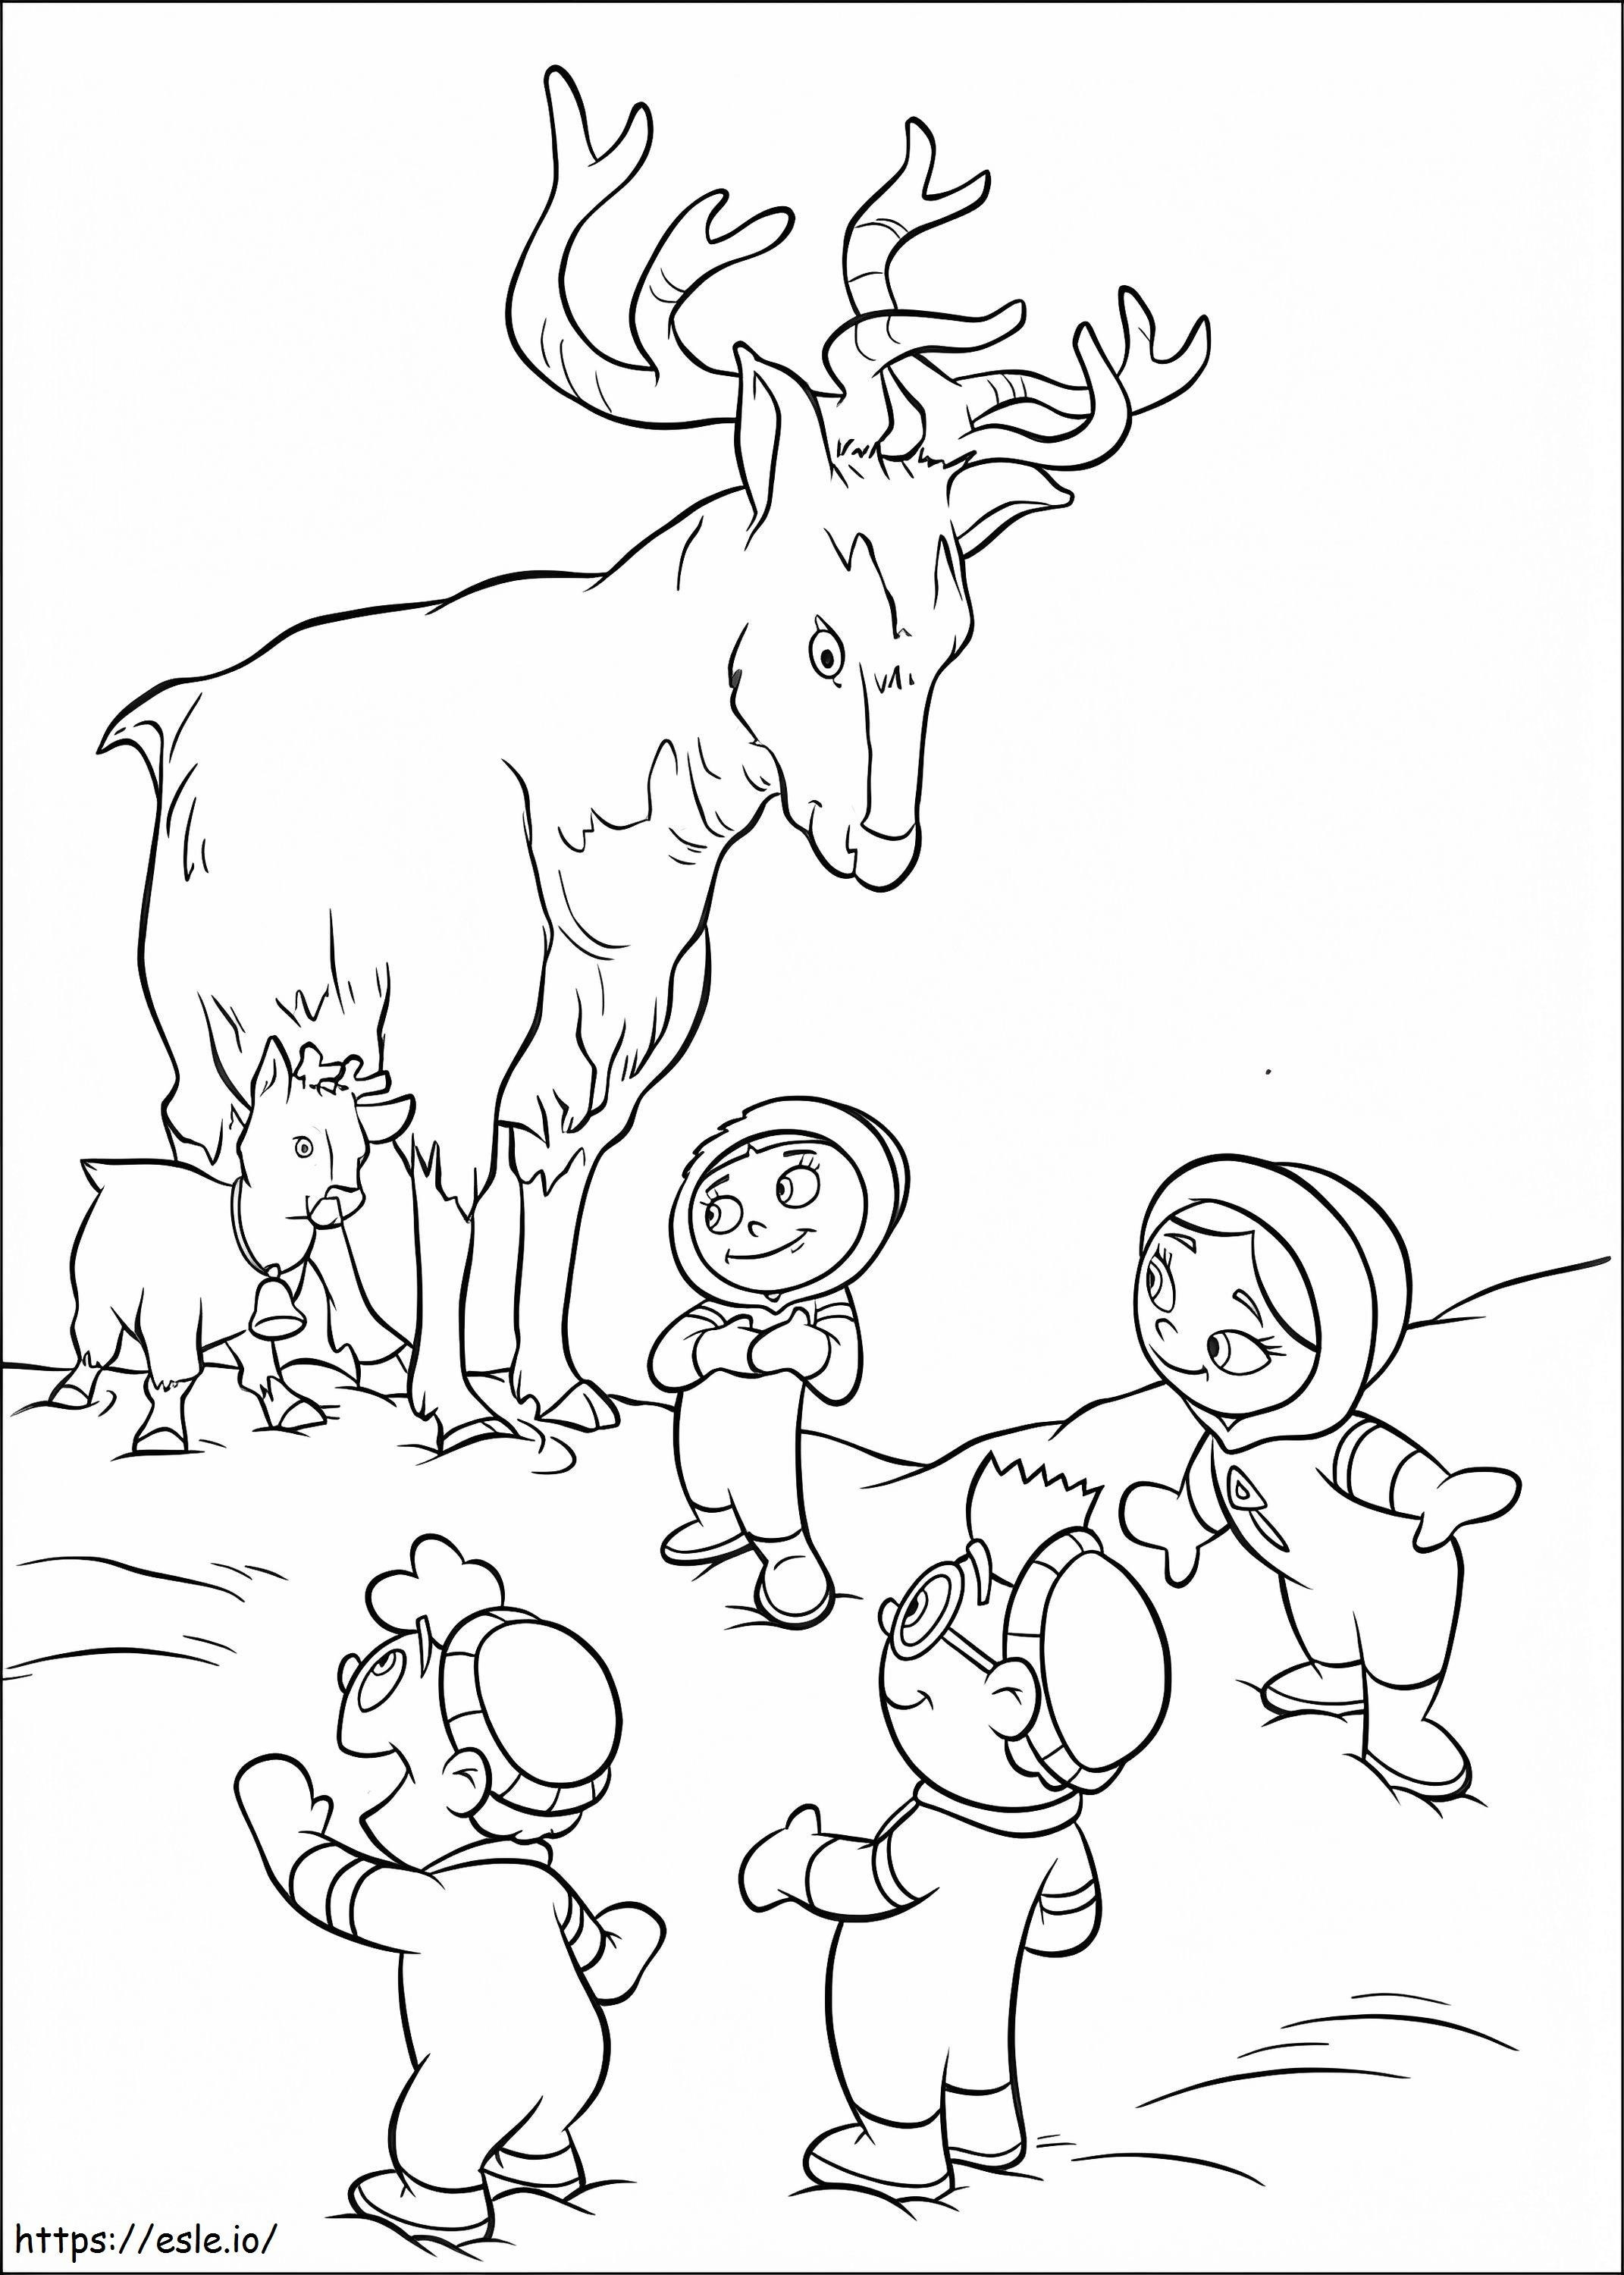 Little Einsteins 3 coloring page